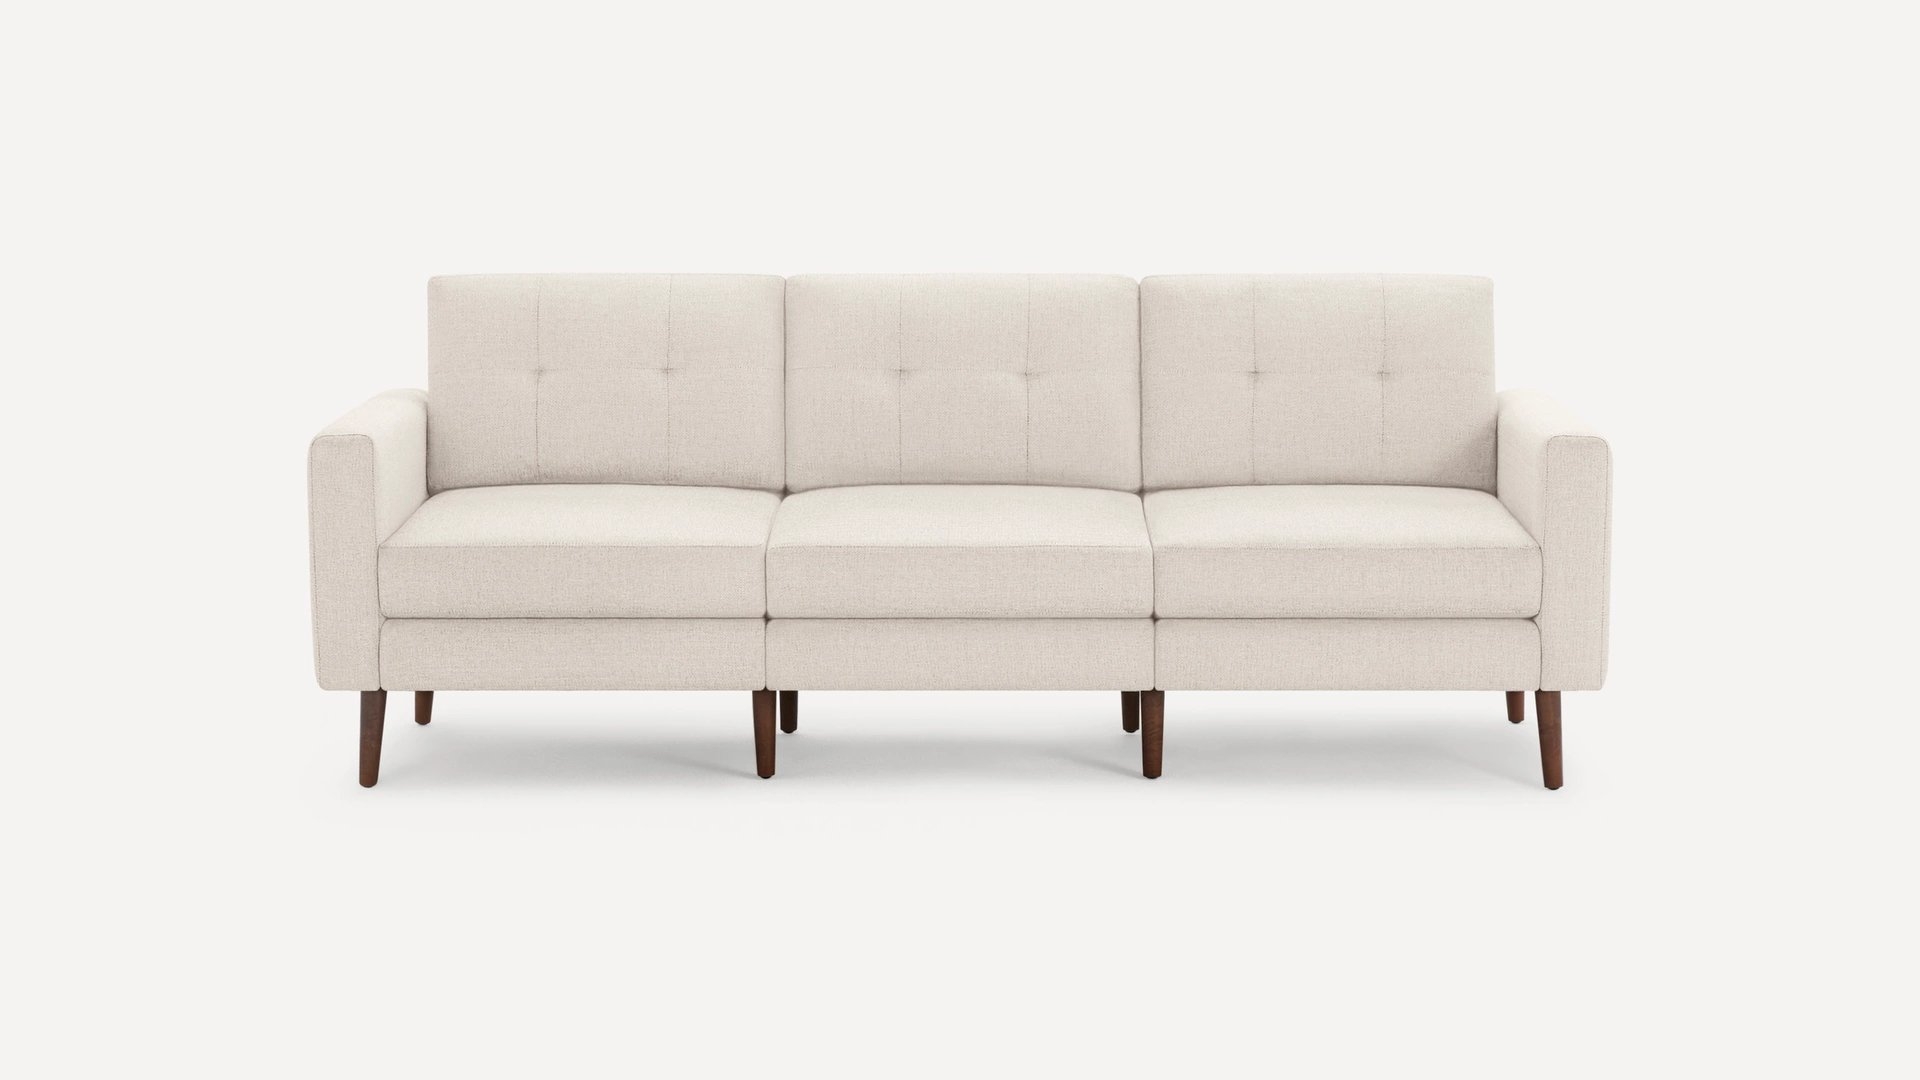 Burrow Ivory White Sofa, 3 Seater, Block Arms, Walnut Wood Legs | Nomad Collection - Image 0